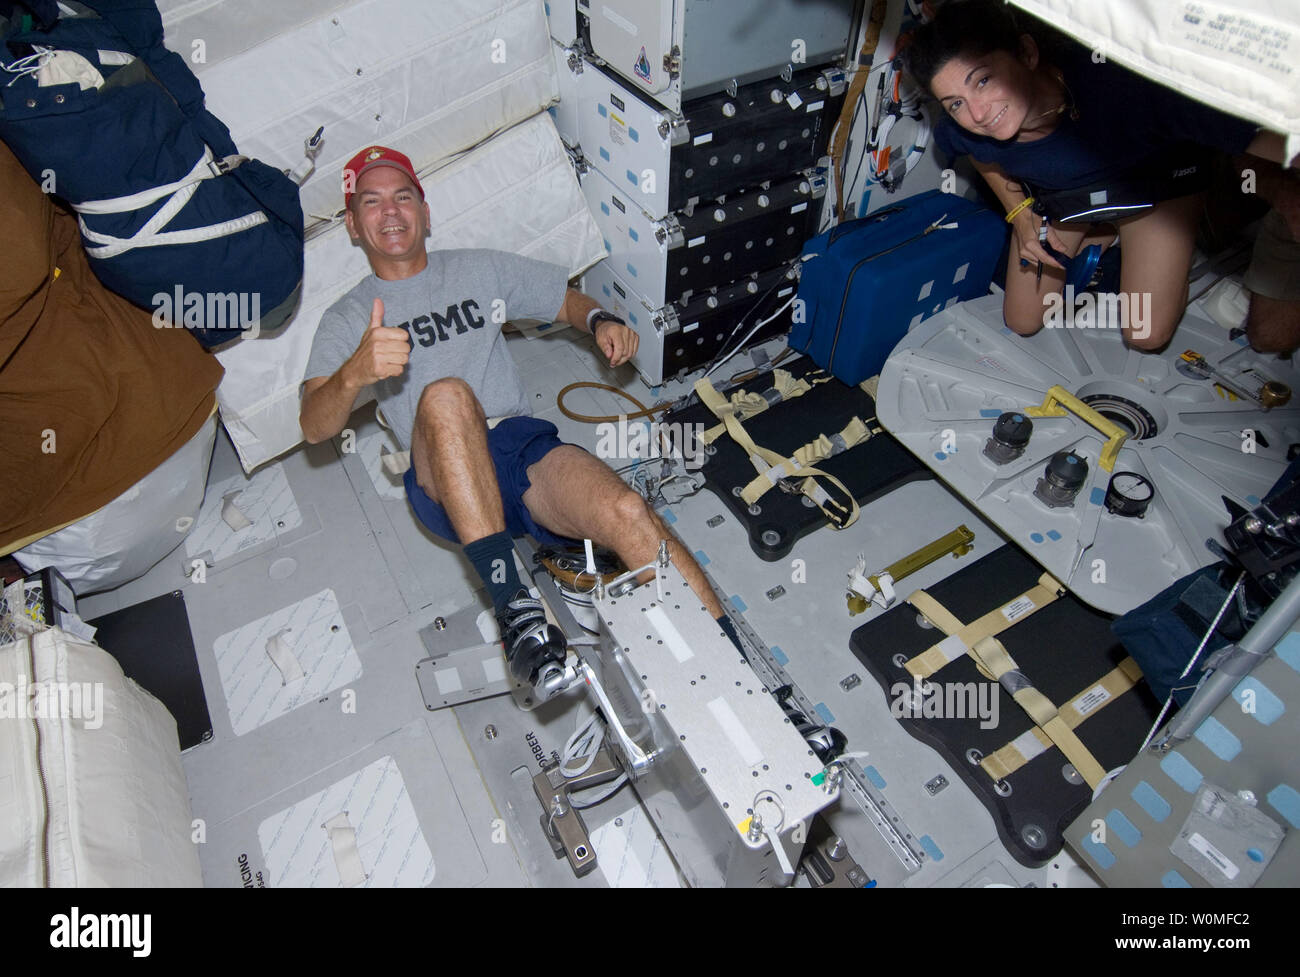 This NASA image taken by astronauts aboard Space Shuttle Discovery on mission STS-128 shows Astronaut Rick Sturckow, STS-128 commander, exercising on a bicycle ergometer on the middeck of the Earth-orbiting Space Shuttle Discovery, August 29, 2009.  UPI/NASA Stock Photo